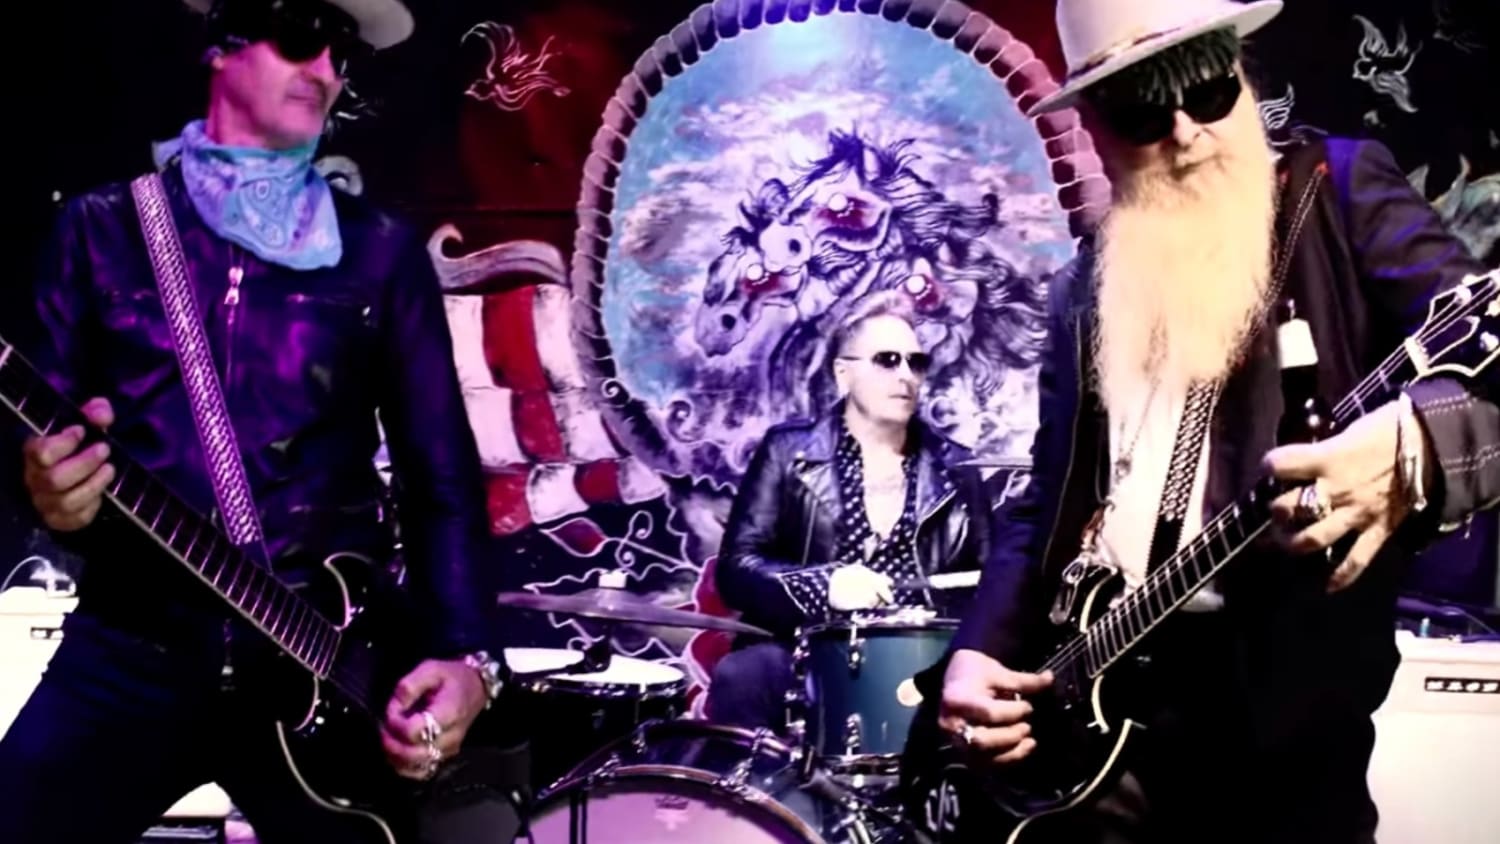 Billy Gibbons Lights Up a Classic Honky-Tonk in New 'My Lucky Card' Video